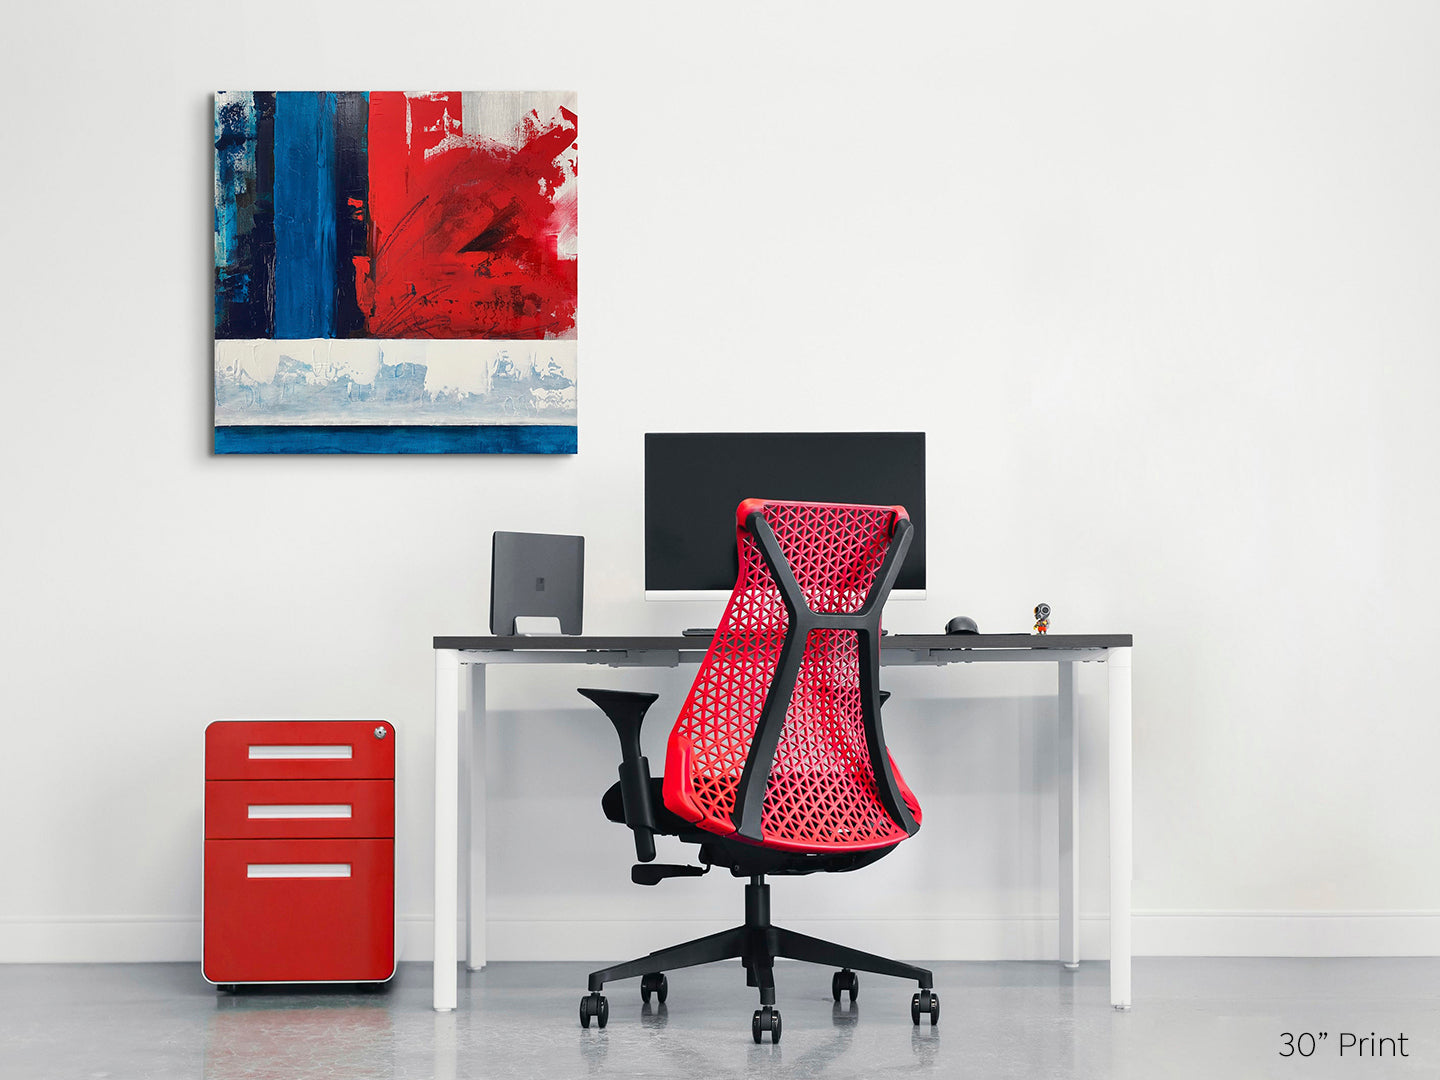 Abstract expressionism, acrylic print on a square gallery-wrapped canvas shown on a pale wall above a white desk with red filing cabinet and red chair